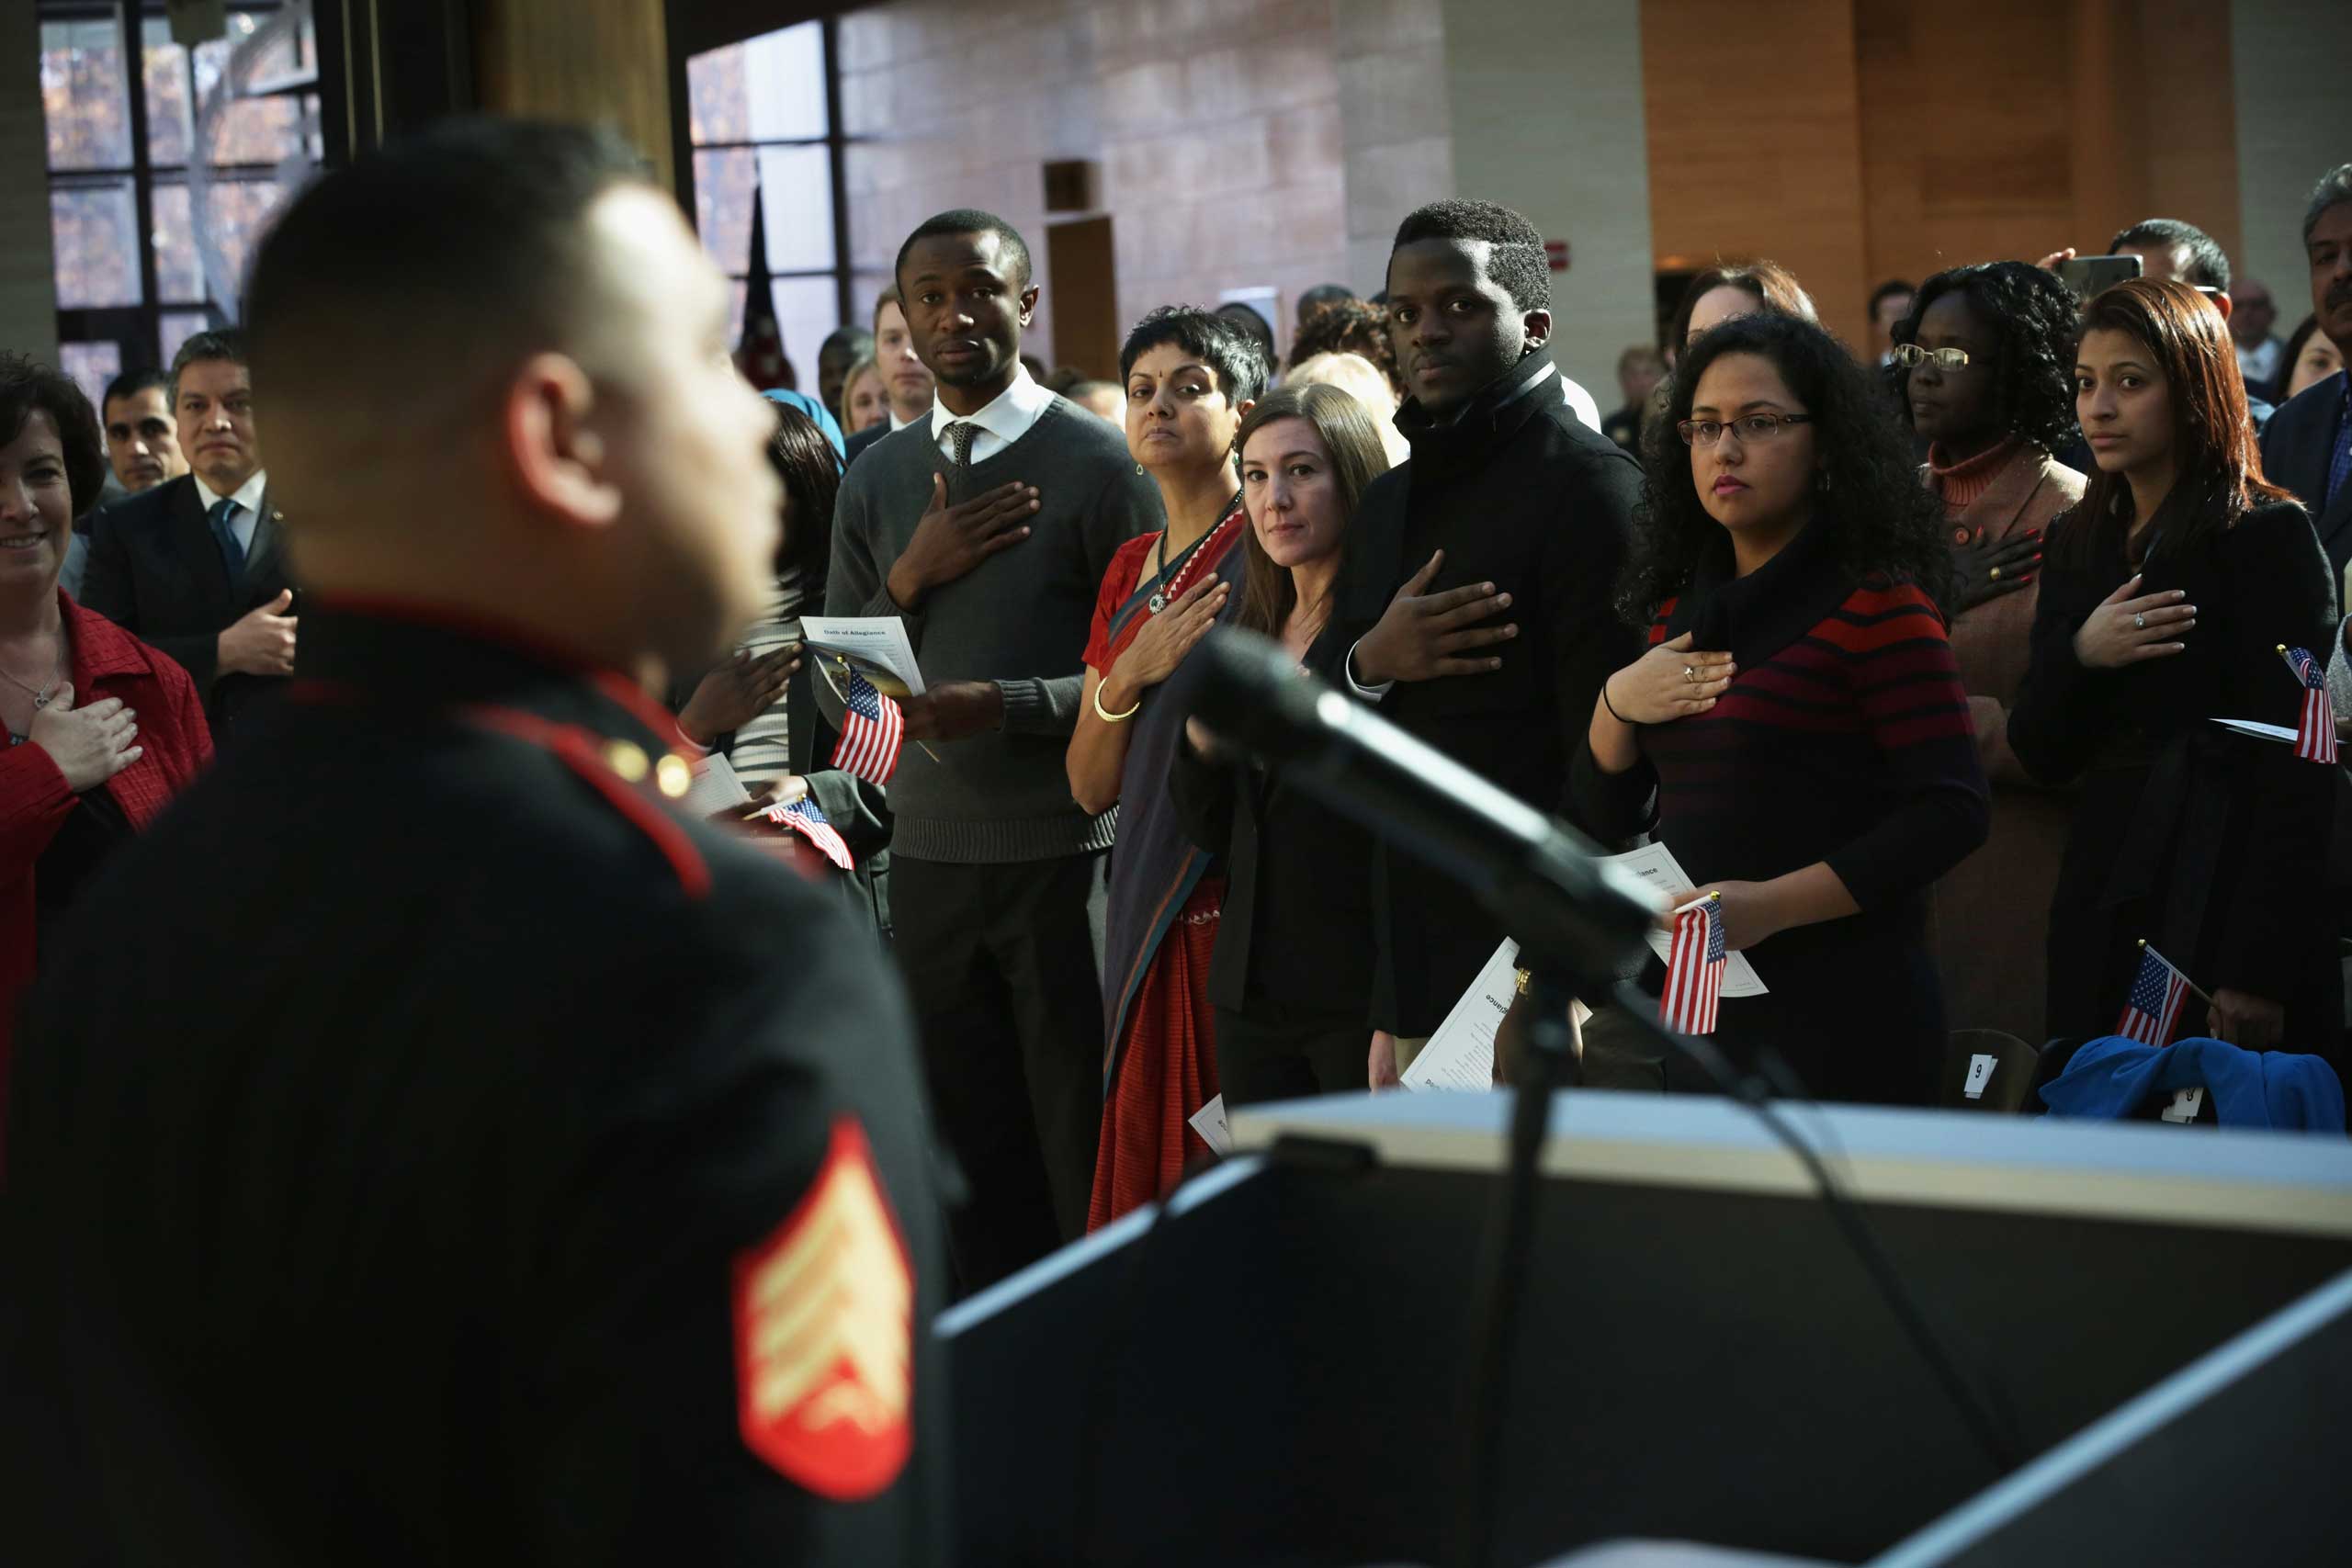 Nov. 10, 2014. New citizens recite the Pledge of Allegiance during a naturalization ceremony  at the National Museum of the Marine Corps in Triangle, Va. Service members, military veterans and civilians take part in 40 naturalization ceremonies across the country from Nov. 7 to 14 to honor Veterans Day and become U.S. citizens.